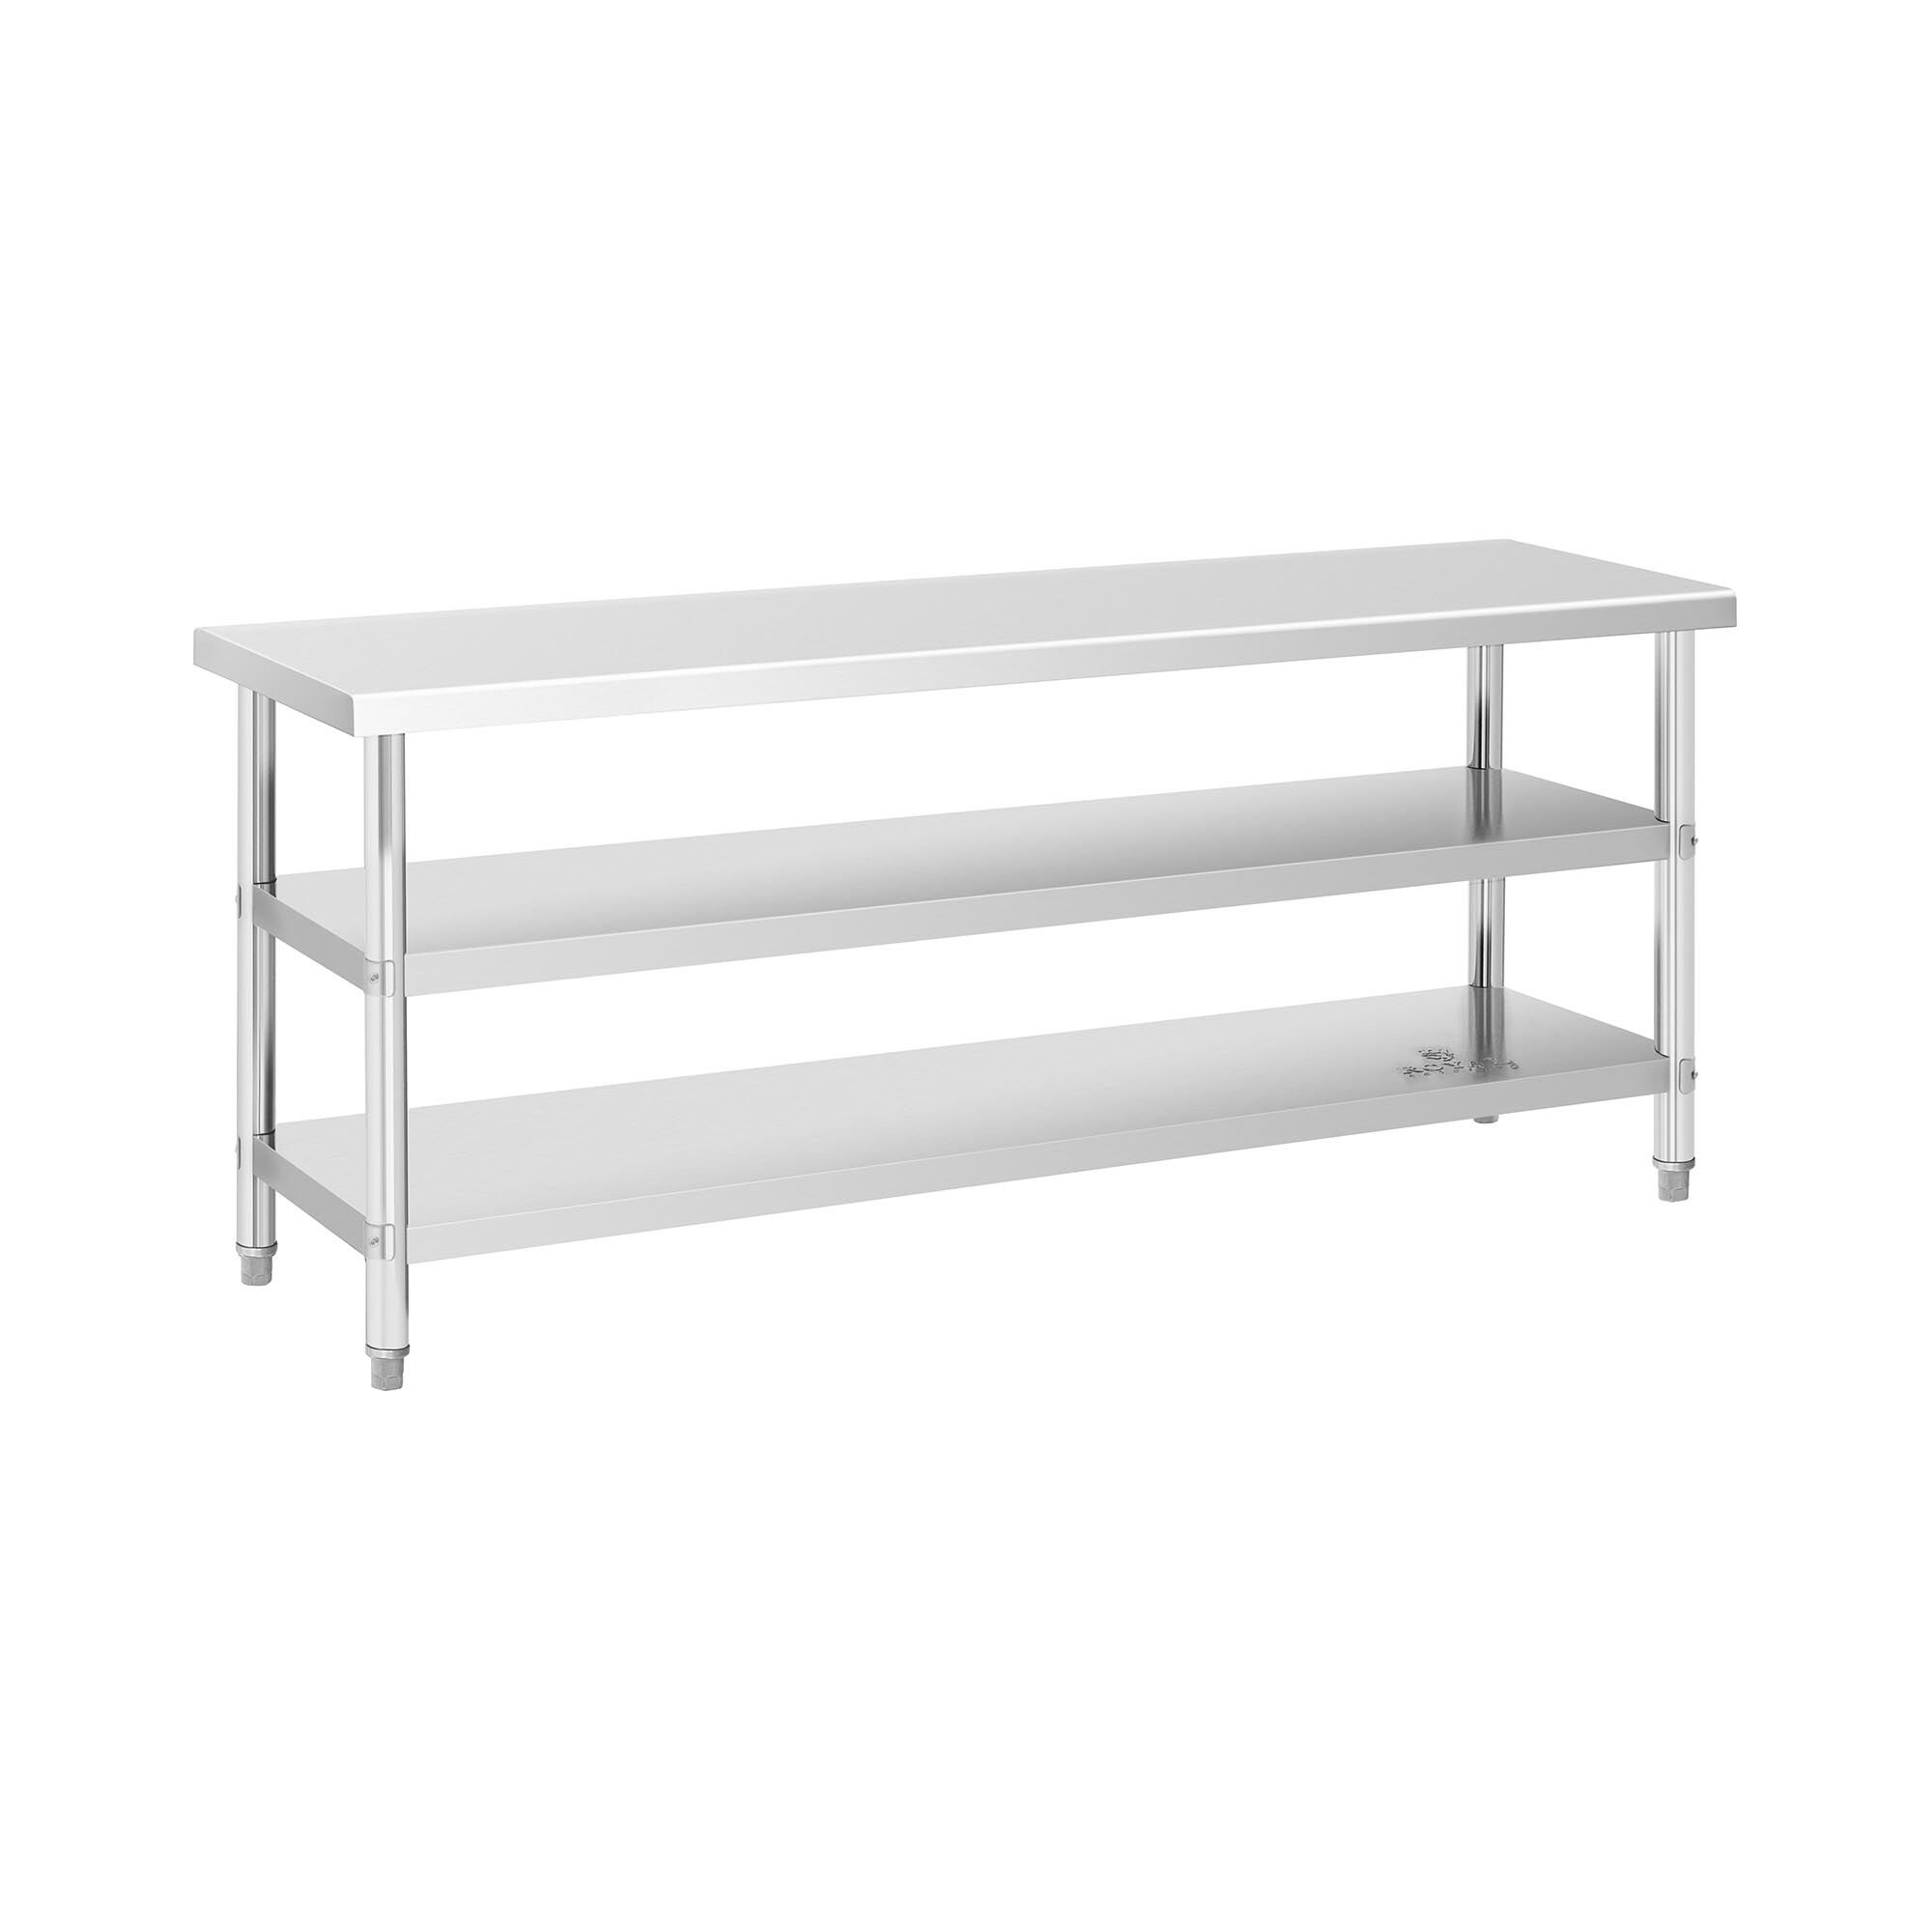 Royal Catering Stainless steel table - 200 x 60 x 5 cm - 231 kg - 2 shelves - Royal Catering